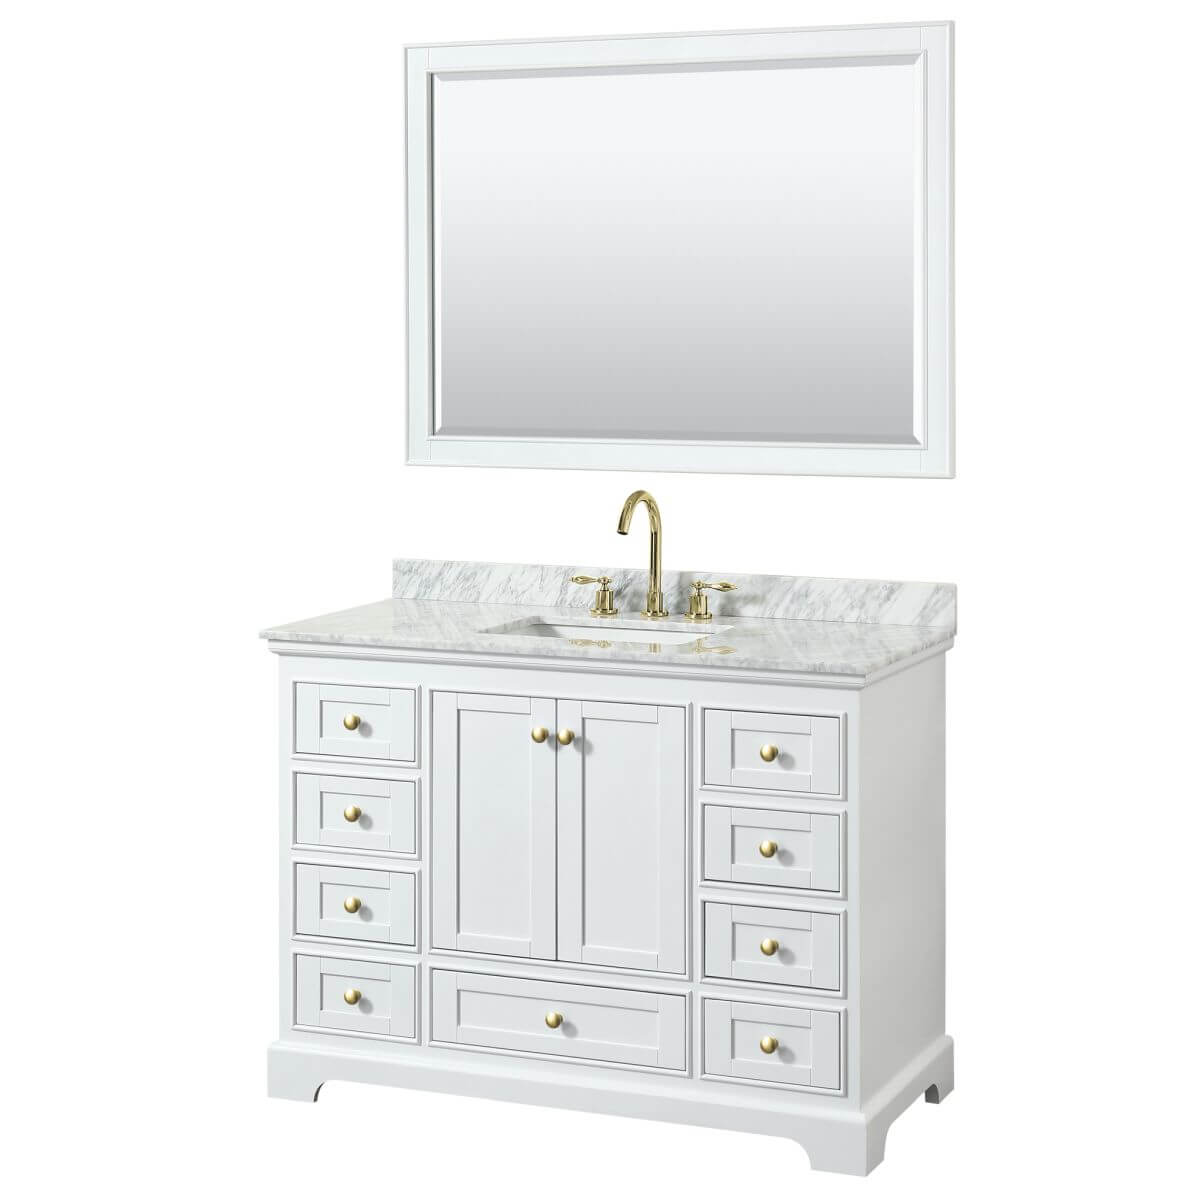 Wyndham Collection Deborah 48 inch Single Bathroom Vanity in White with White Carrara Marble Countertop, Undermount Square Sink, Brushed Gold Trim and 46 inch Mirror - WCS202048SWGCMUNSM46